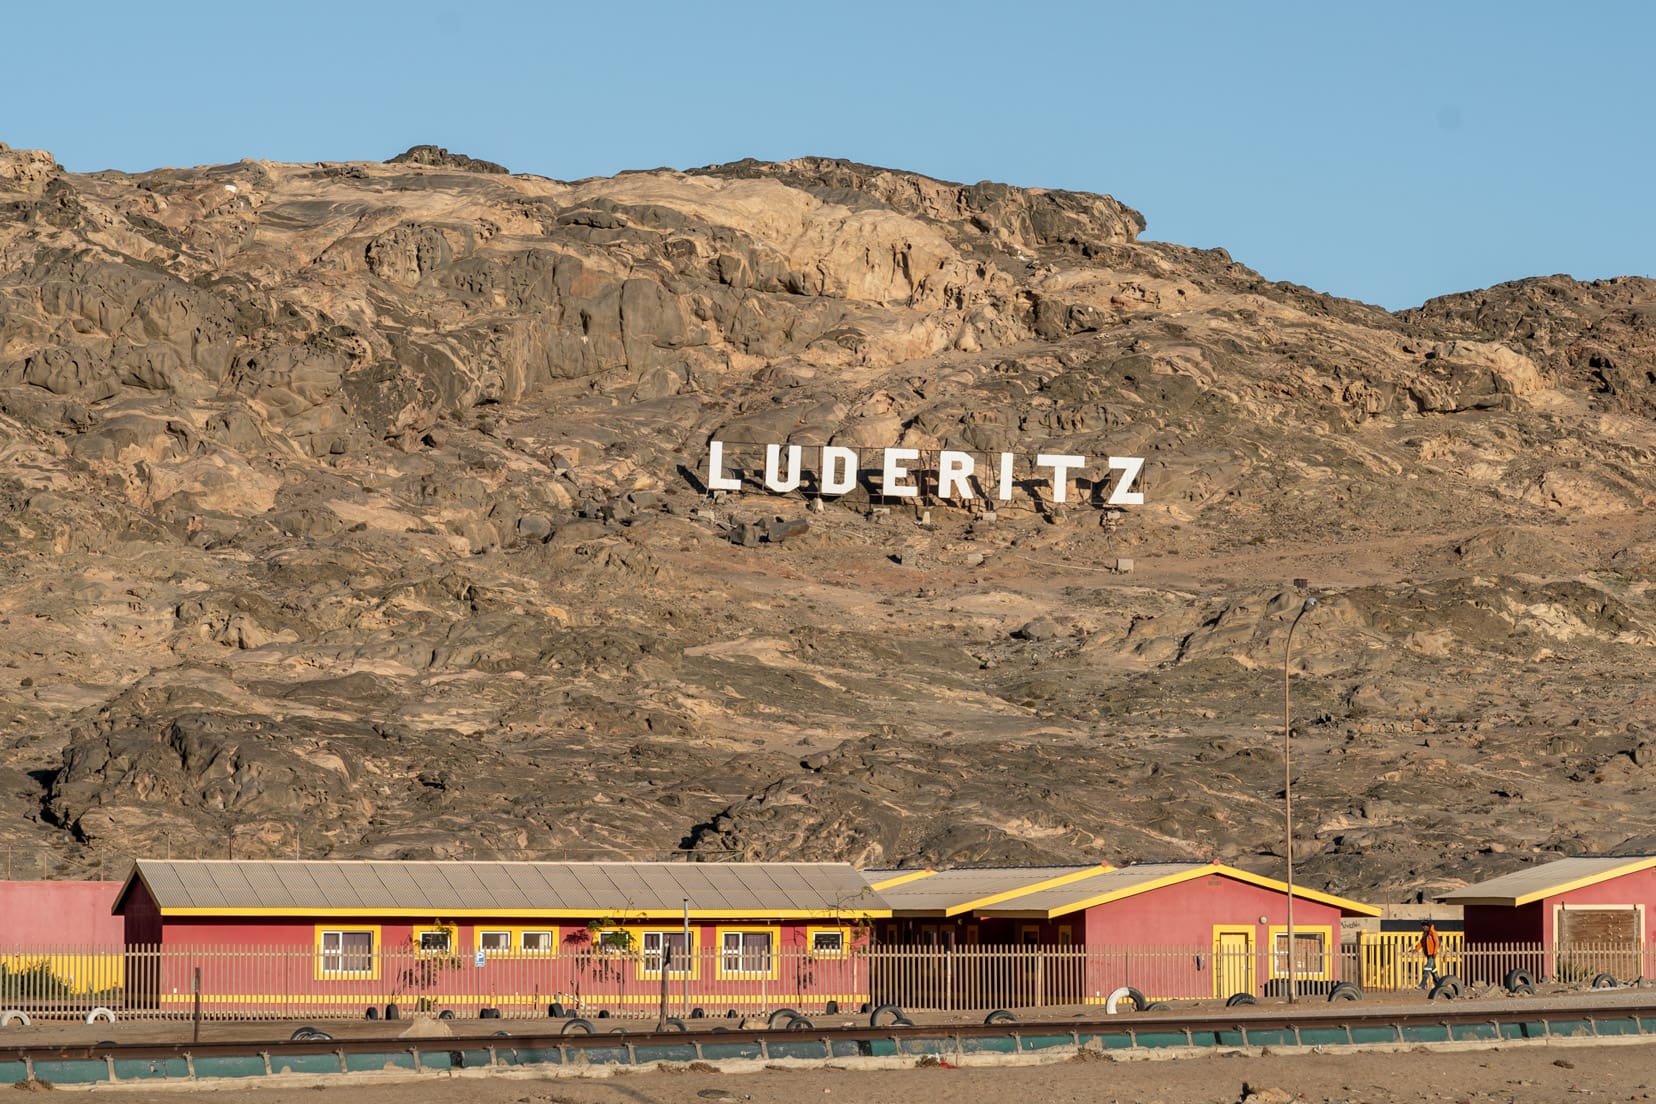 luderitz-sign on the hill